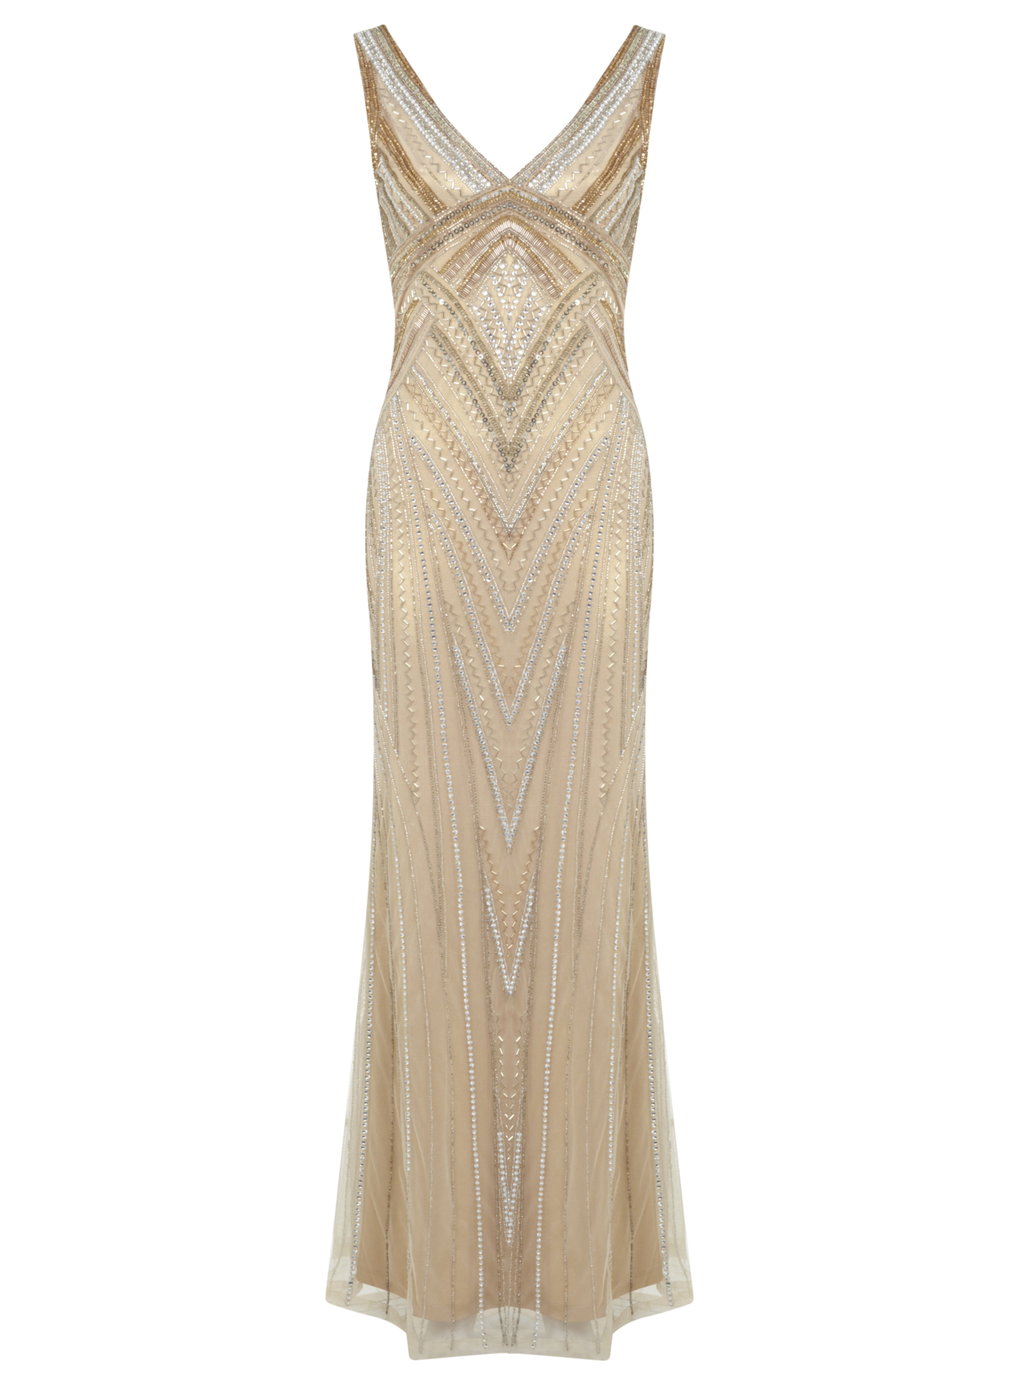 Gold Maxi Dress – The Perfect Party Look – careyfashion.com